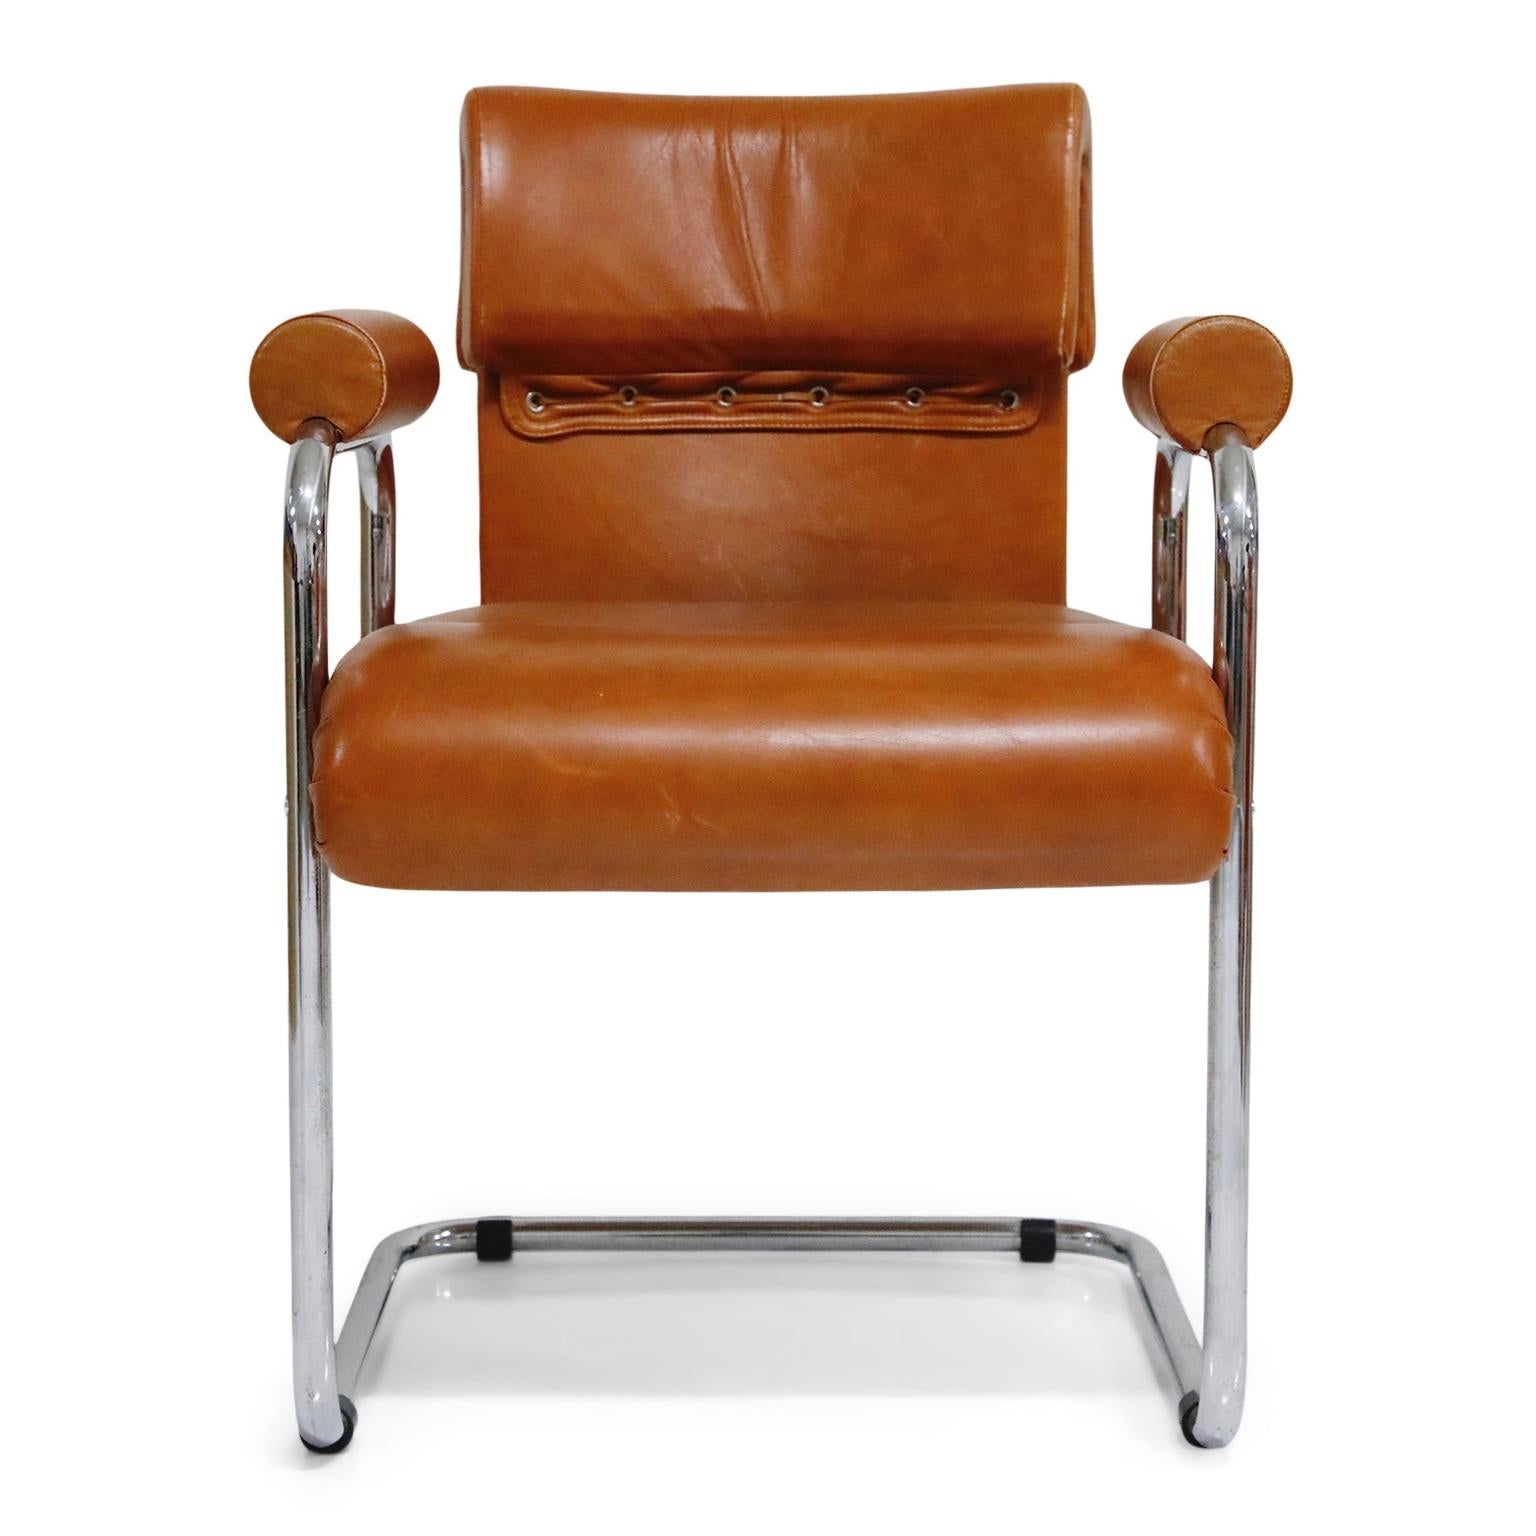 An incredible set of four (4) chairs by Guido Faleschini for i4Mariani, under The Pace collection and retailed by Hermes. The seats and backs retain the original supple cognac colored leather upholstery and are attached to graceful chromed steel